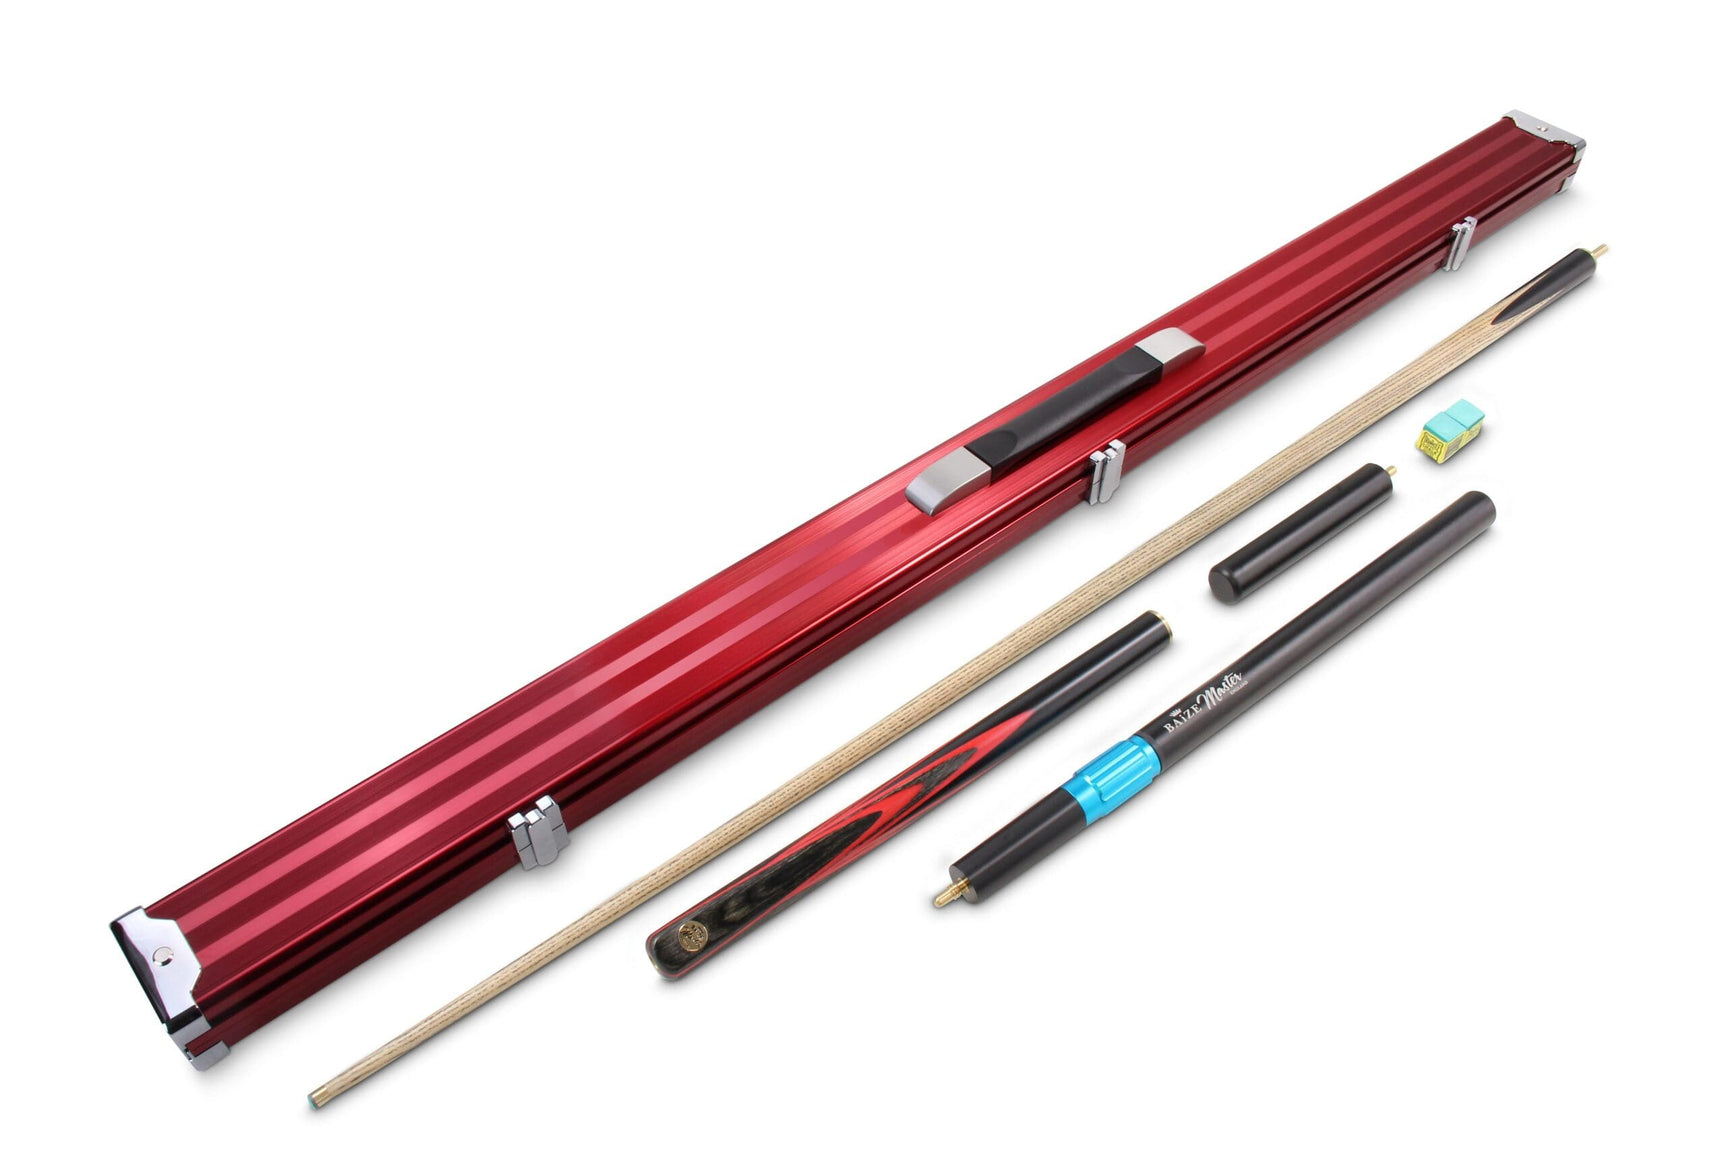 Baize Master G14 RED EMPEROR 3/4 Cue Set 9.5mm Tip With Baize Master 3/4 Red Pro-Line Case, Long Telescopic Extension, Mini Butt and 2 Chalks